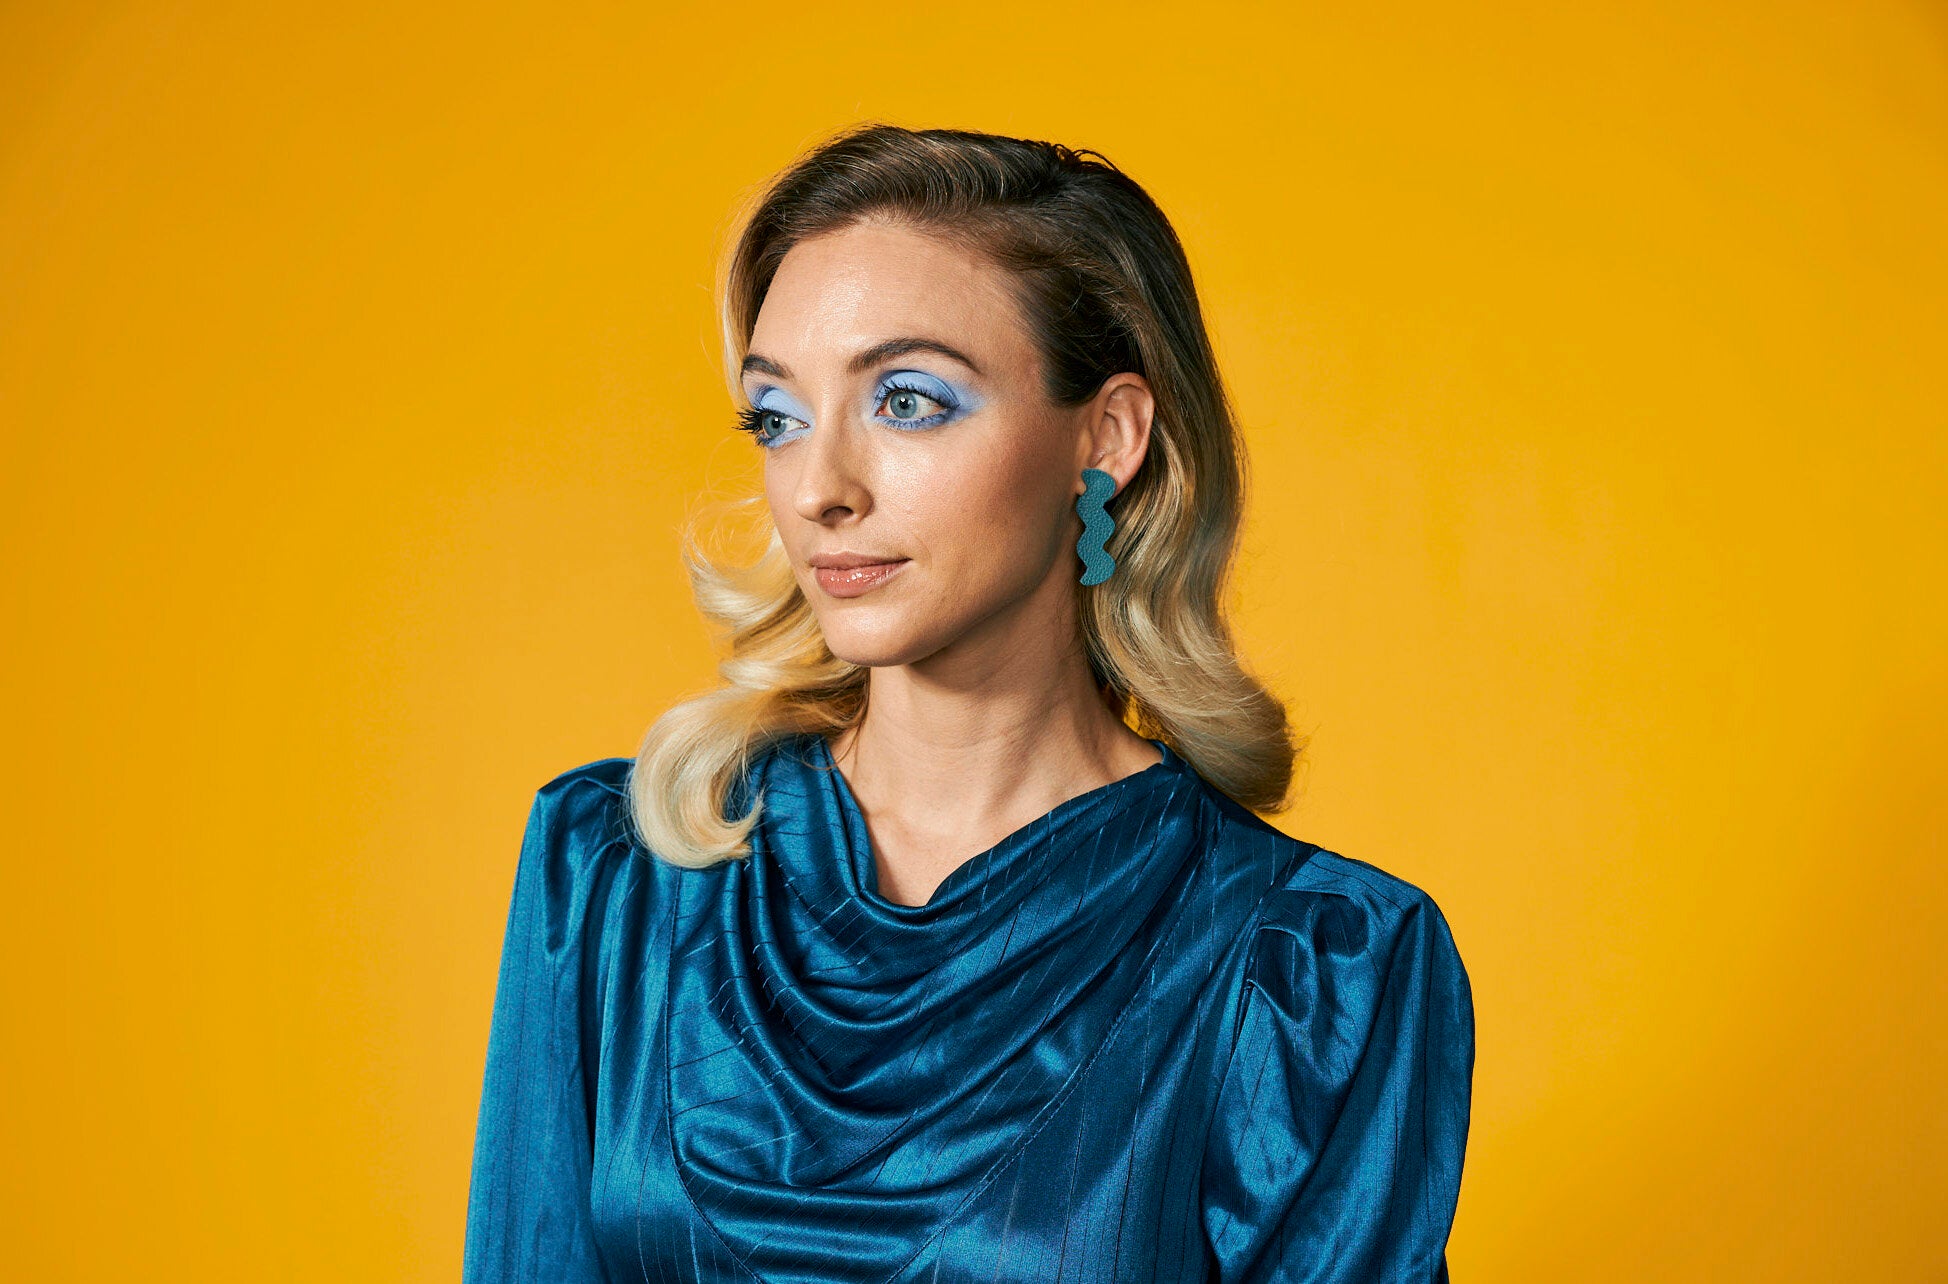 A blonde woman wears a monochromatic turquoise blue outfit wth matching teal leather statement earrings in a zig zag shape.